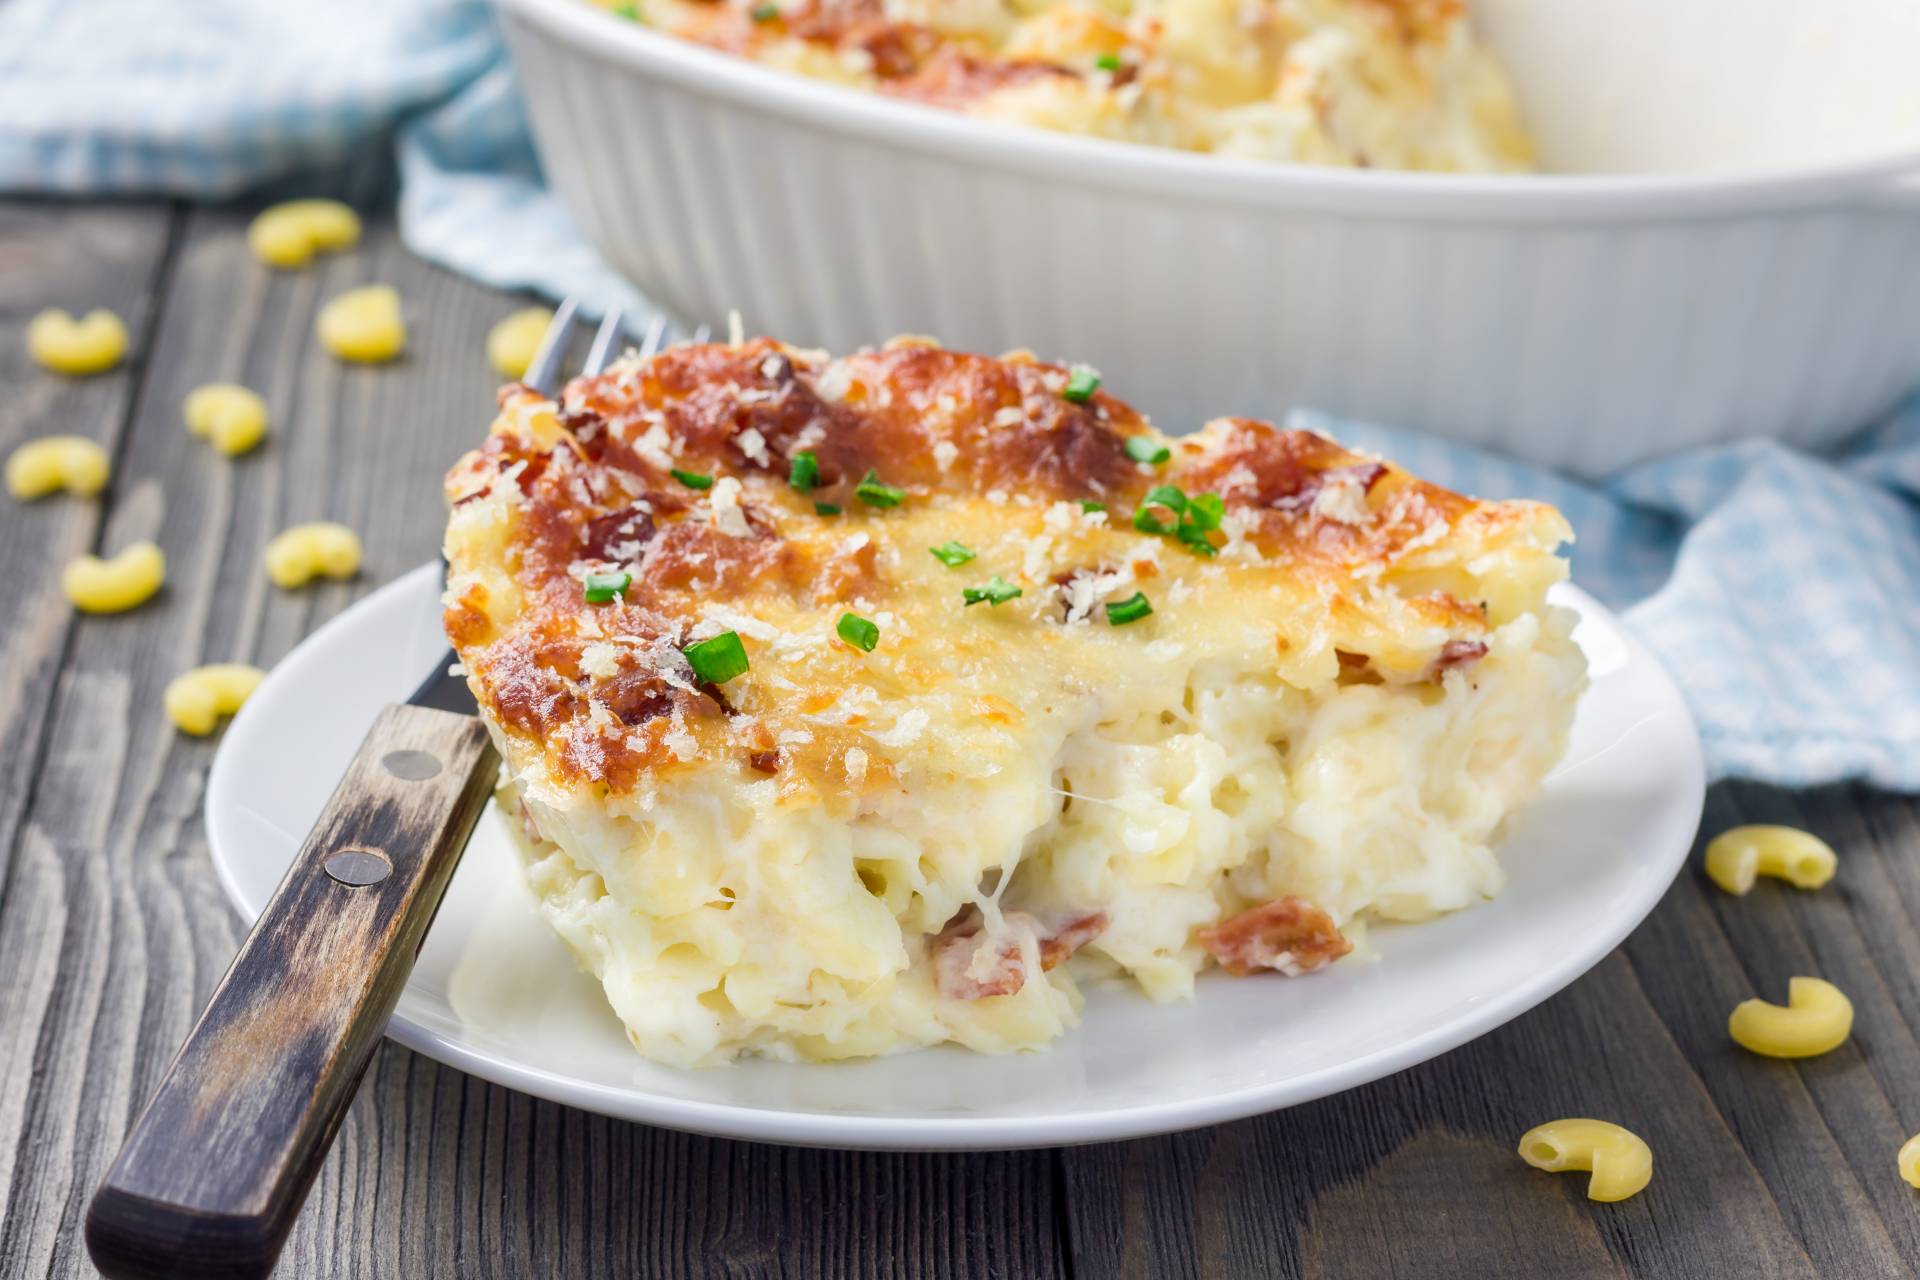 Party Size Italian Baked Mac and Cheese